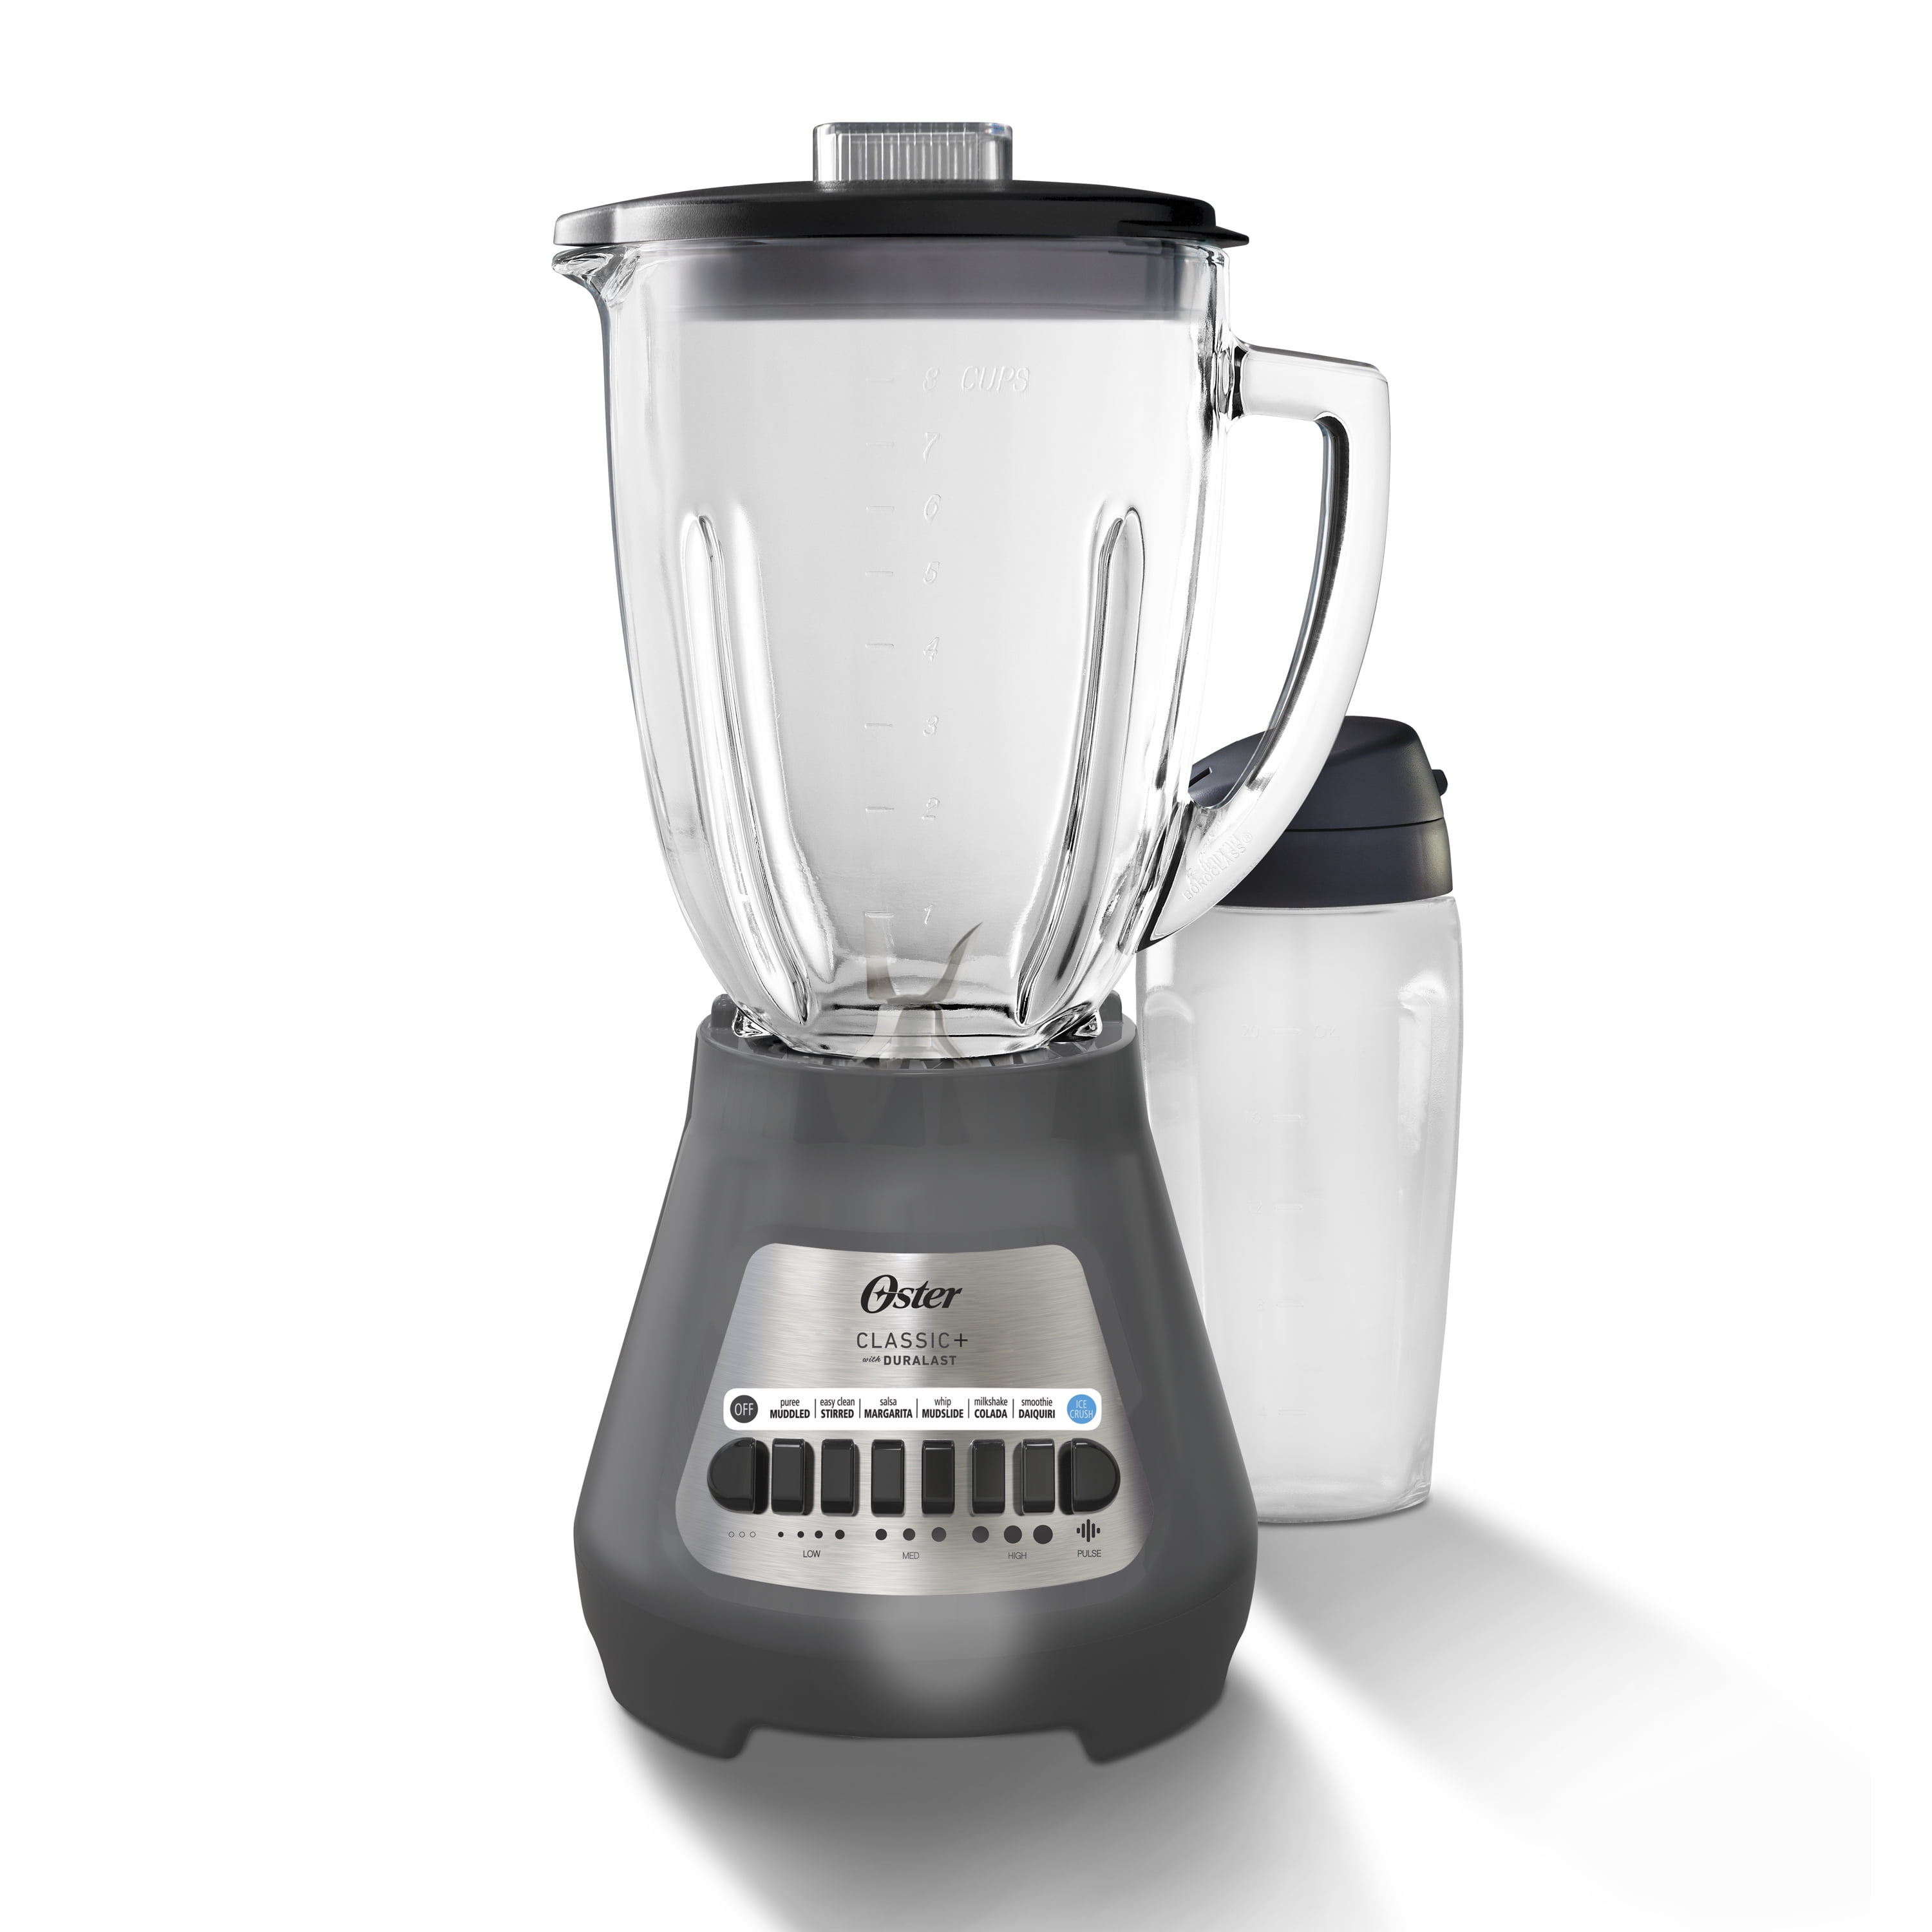 Oster - 2-in-1 Blender System with Blend-N-Go Cup - Gray